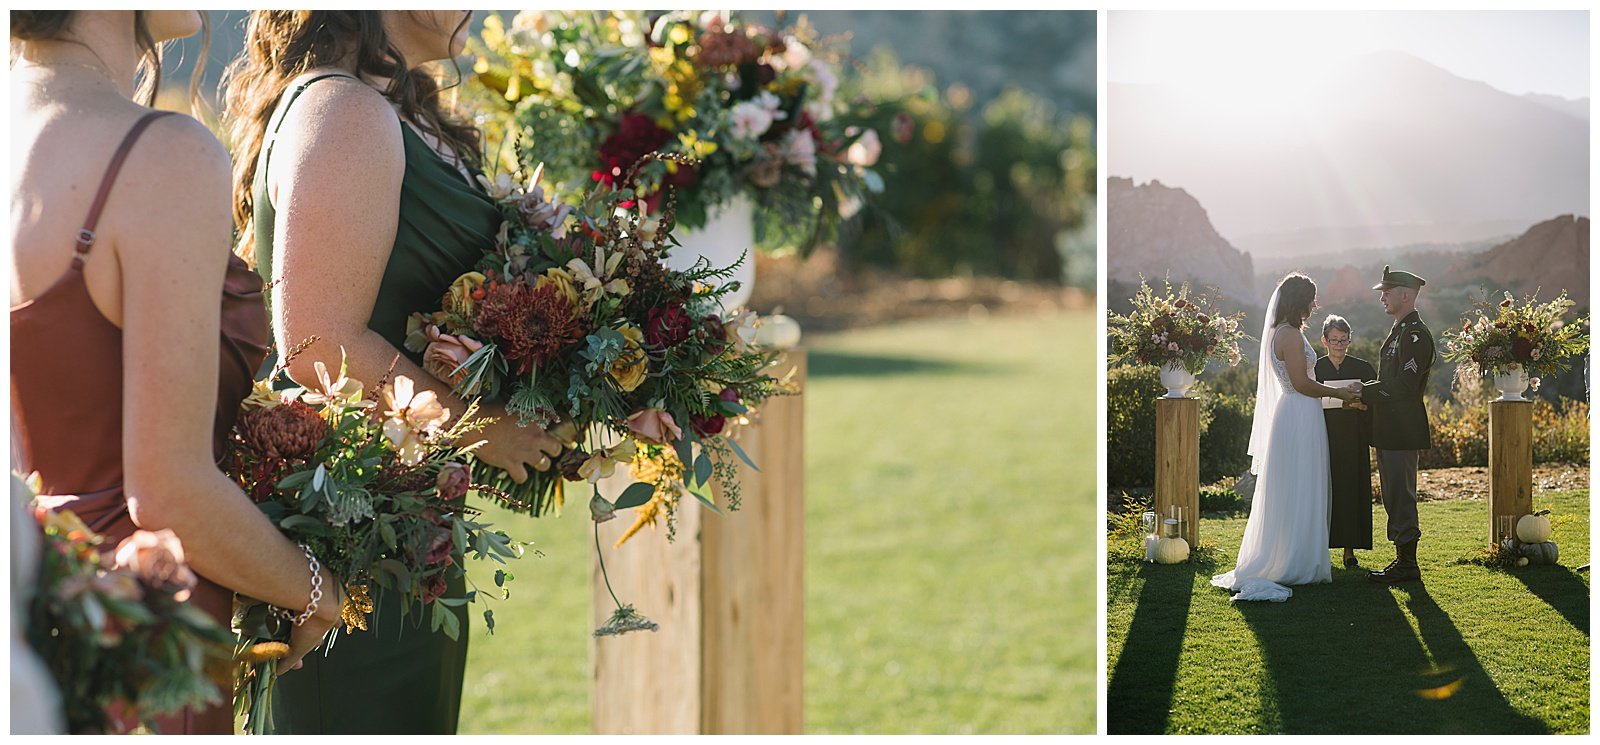 Fall Bridesmaid Bouquets at The Garden of the Gods Resort